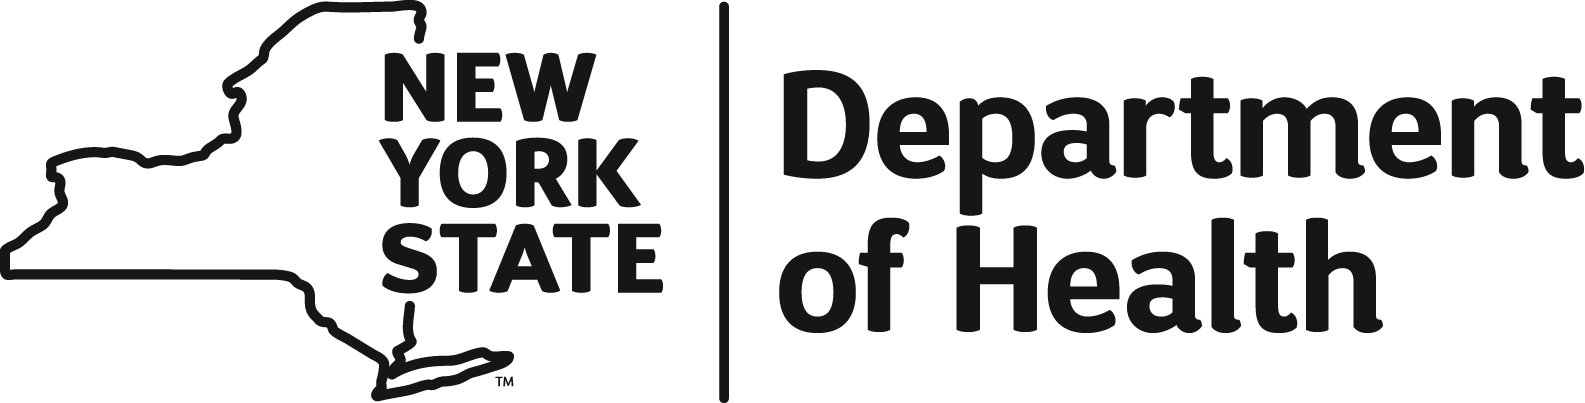 New York State Department of Health : CSH